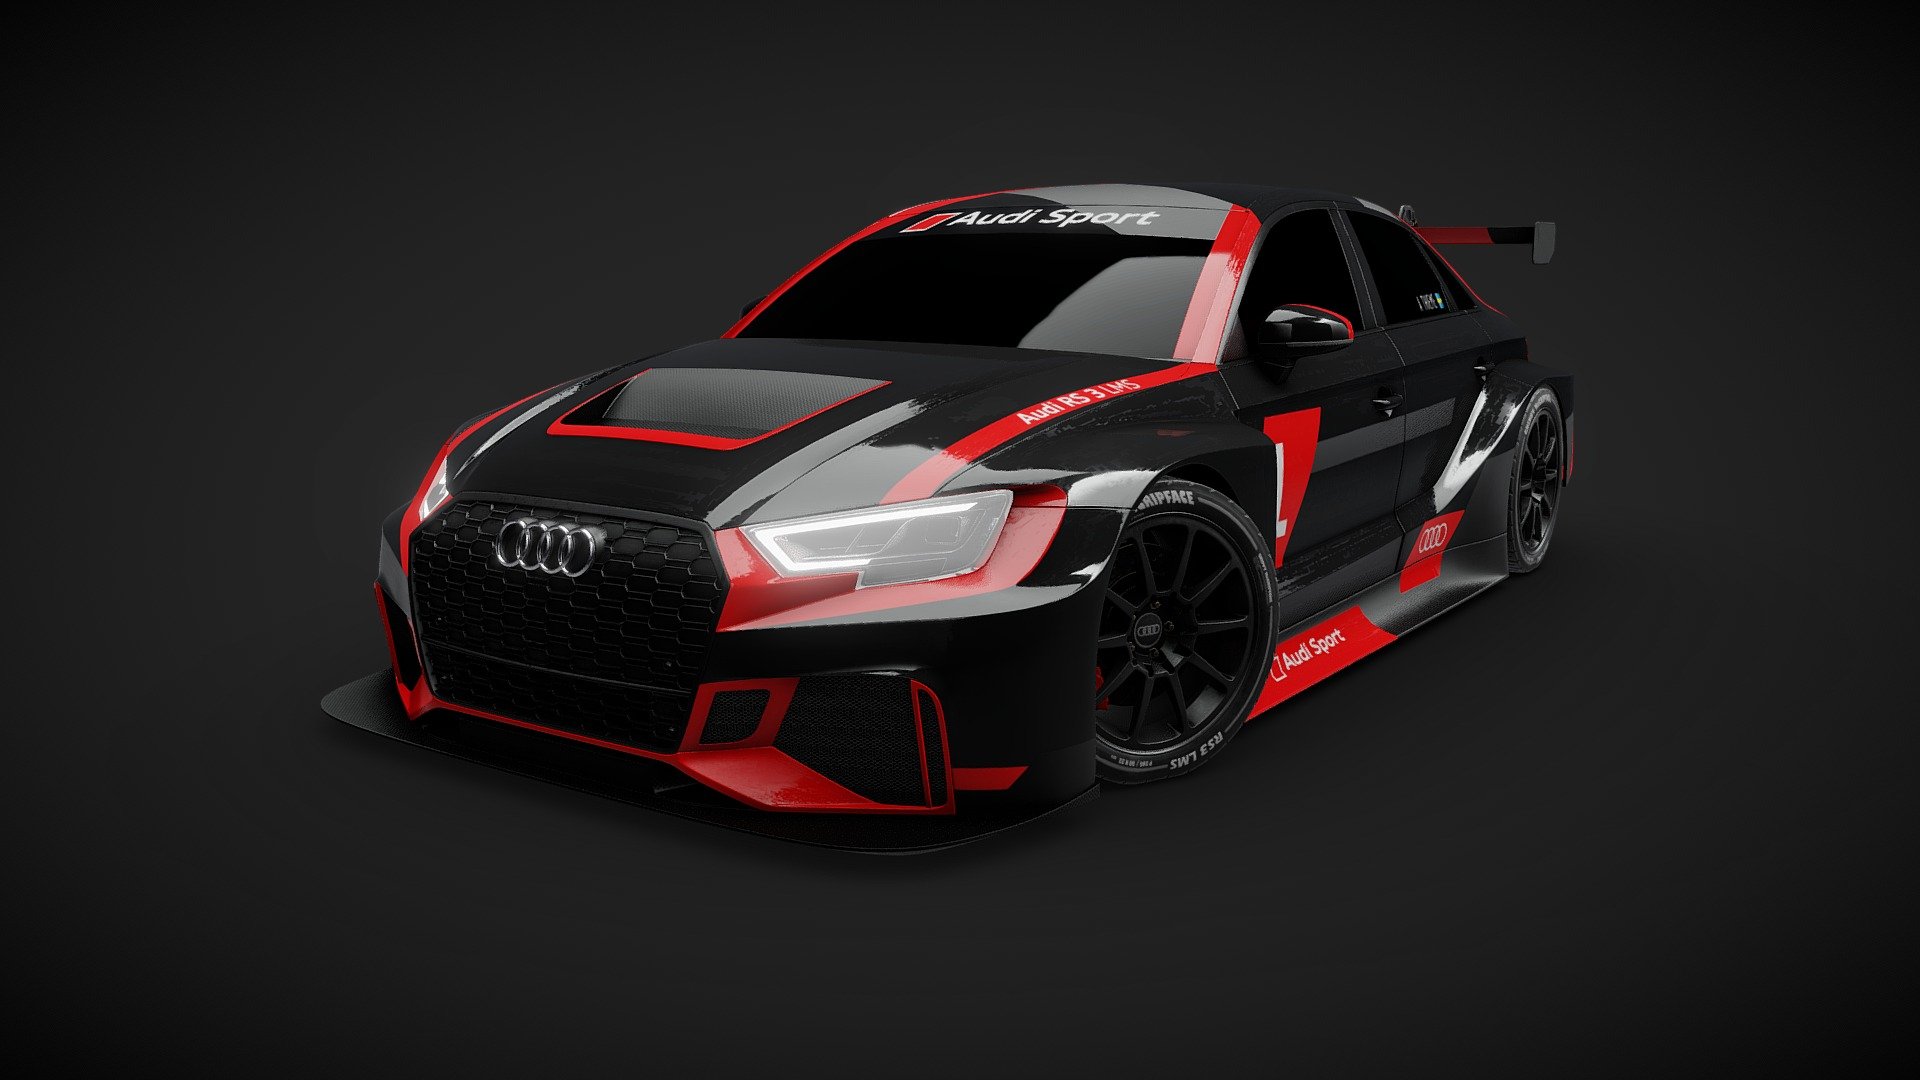 Here's my take on the beautiful Audi RS3 LMS. It was created for a school assignment as well as for my portfolio. It was modeled in Blender, baked in Marmoset Toolbag 4 and textured in Substance Painter. 

If you wanna see some sweet renders of the car you can find them on my artstation: https://www.artstation.com/artwork/3dARPg

Thanks for viewing my model and have a fantastic day! - Audi RS3 LMS - 3D model by thethieme 3d model